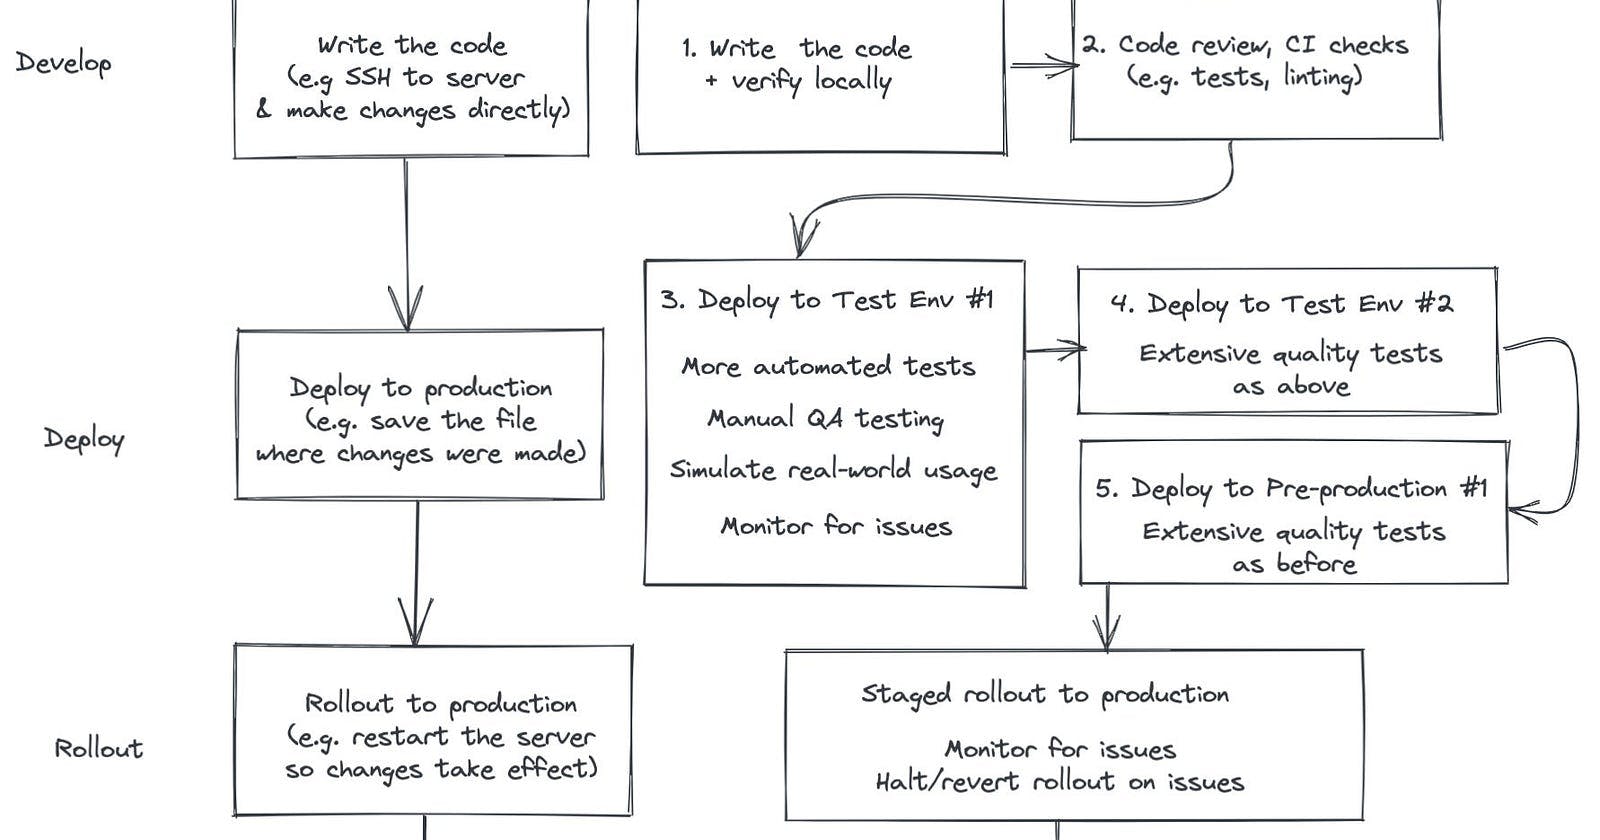 Process of Shipping code to Production.